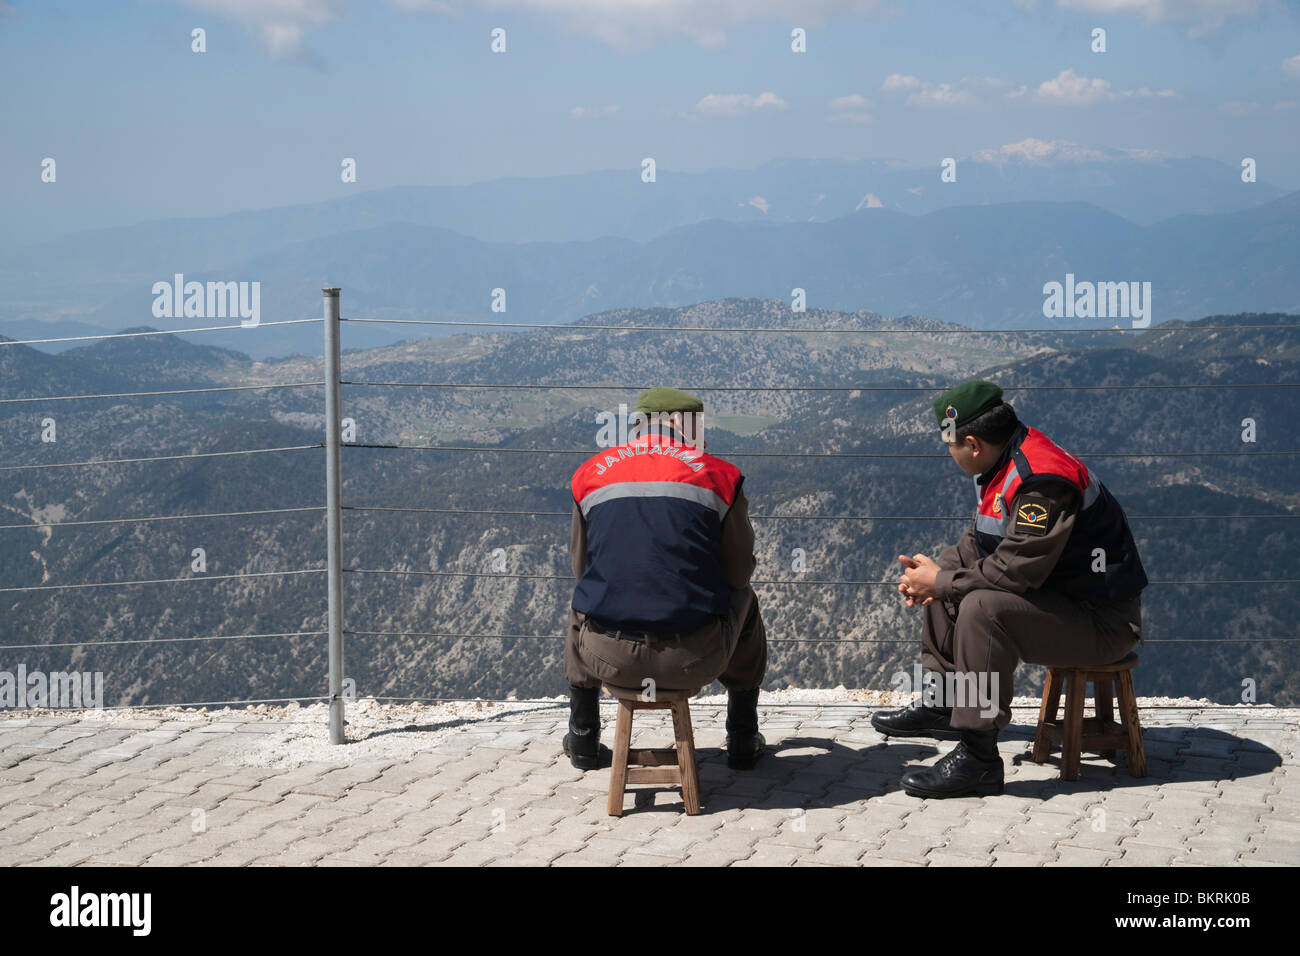 Turkish jendarms or armed police relax at the summit of Mount Tahtali after accompanying tourists using the cable car Stock Photo